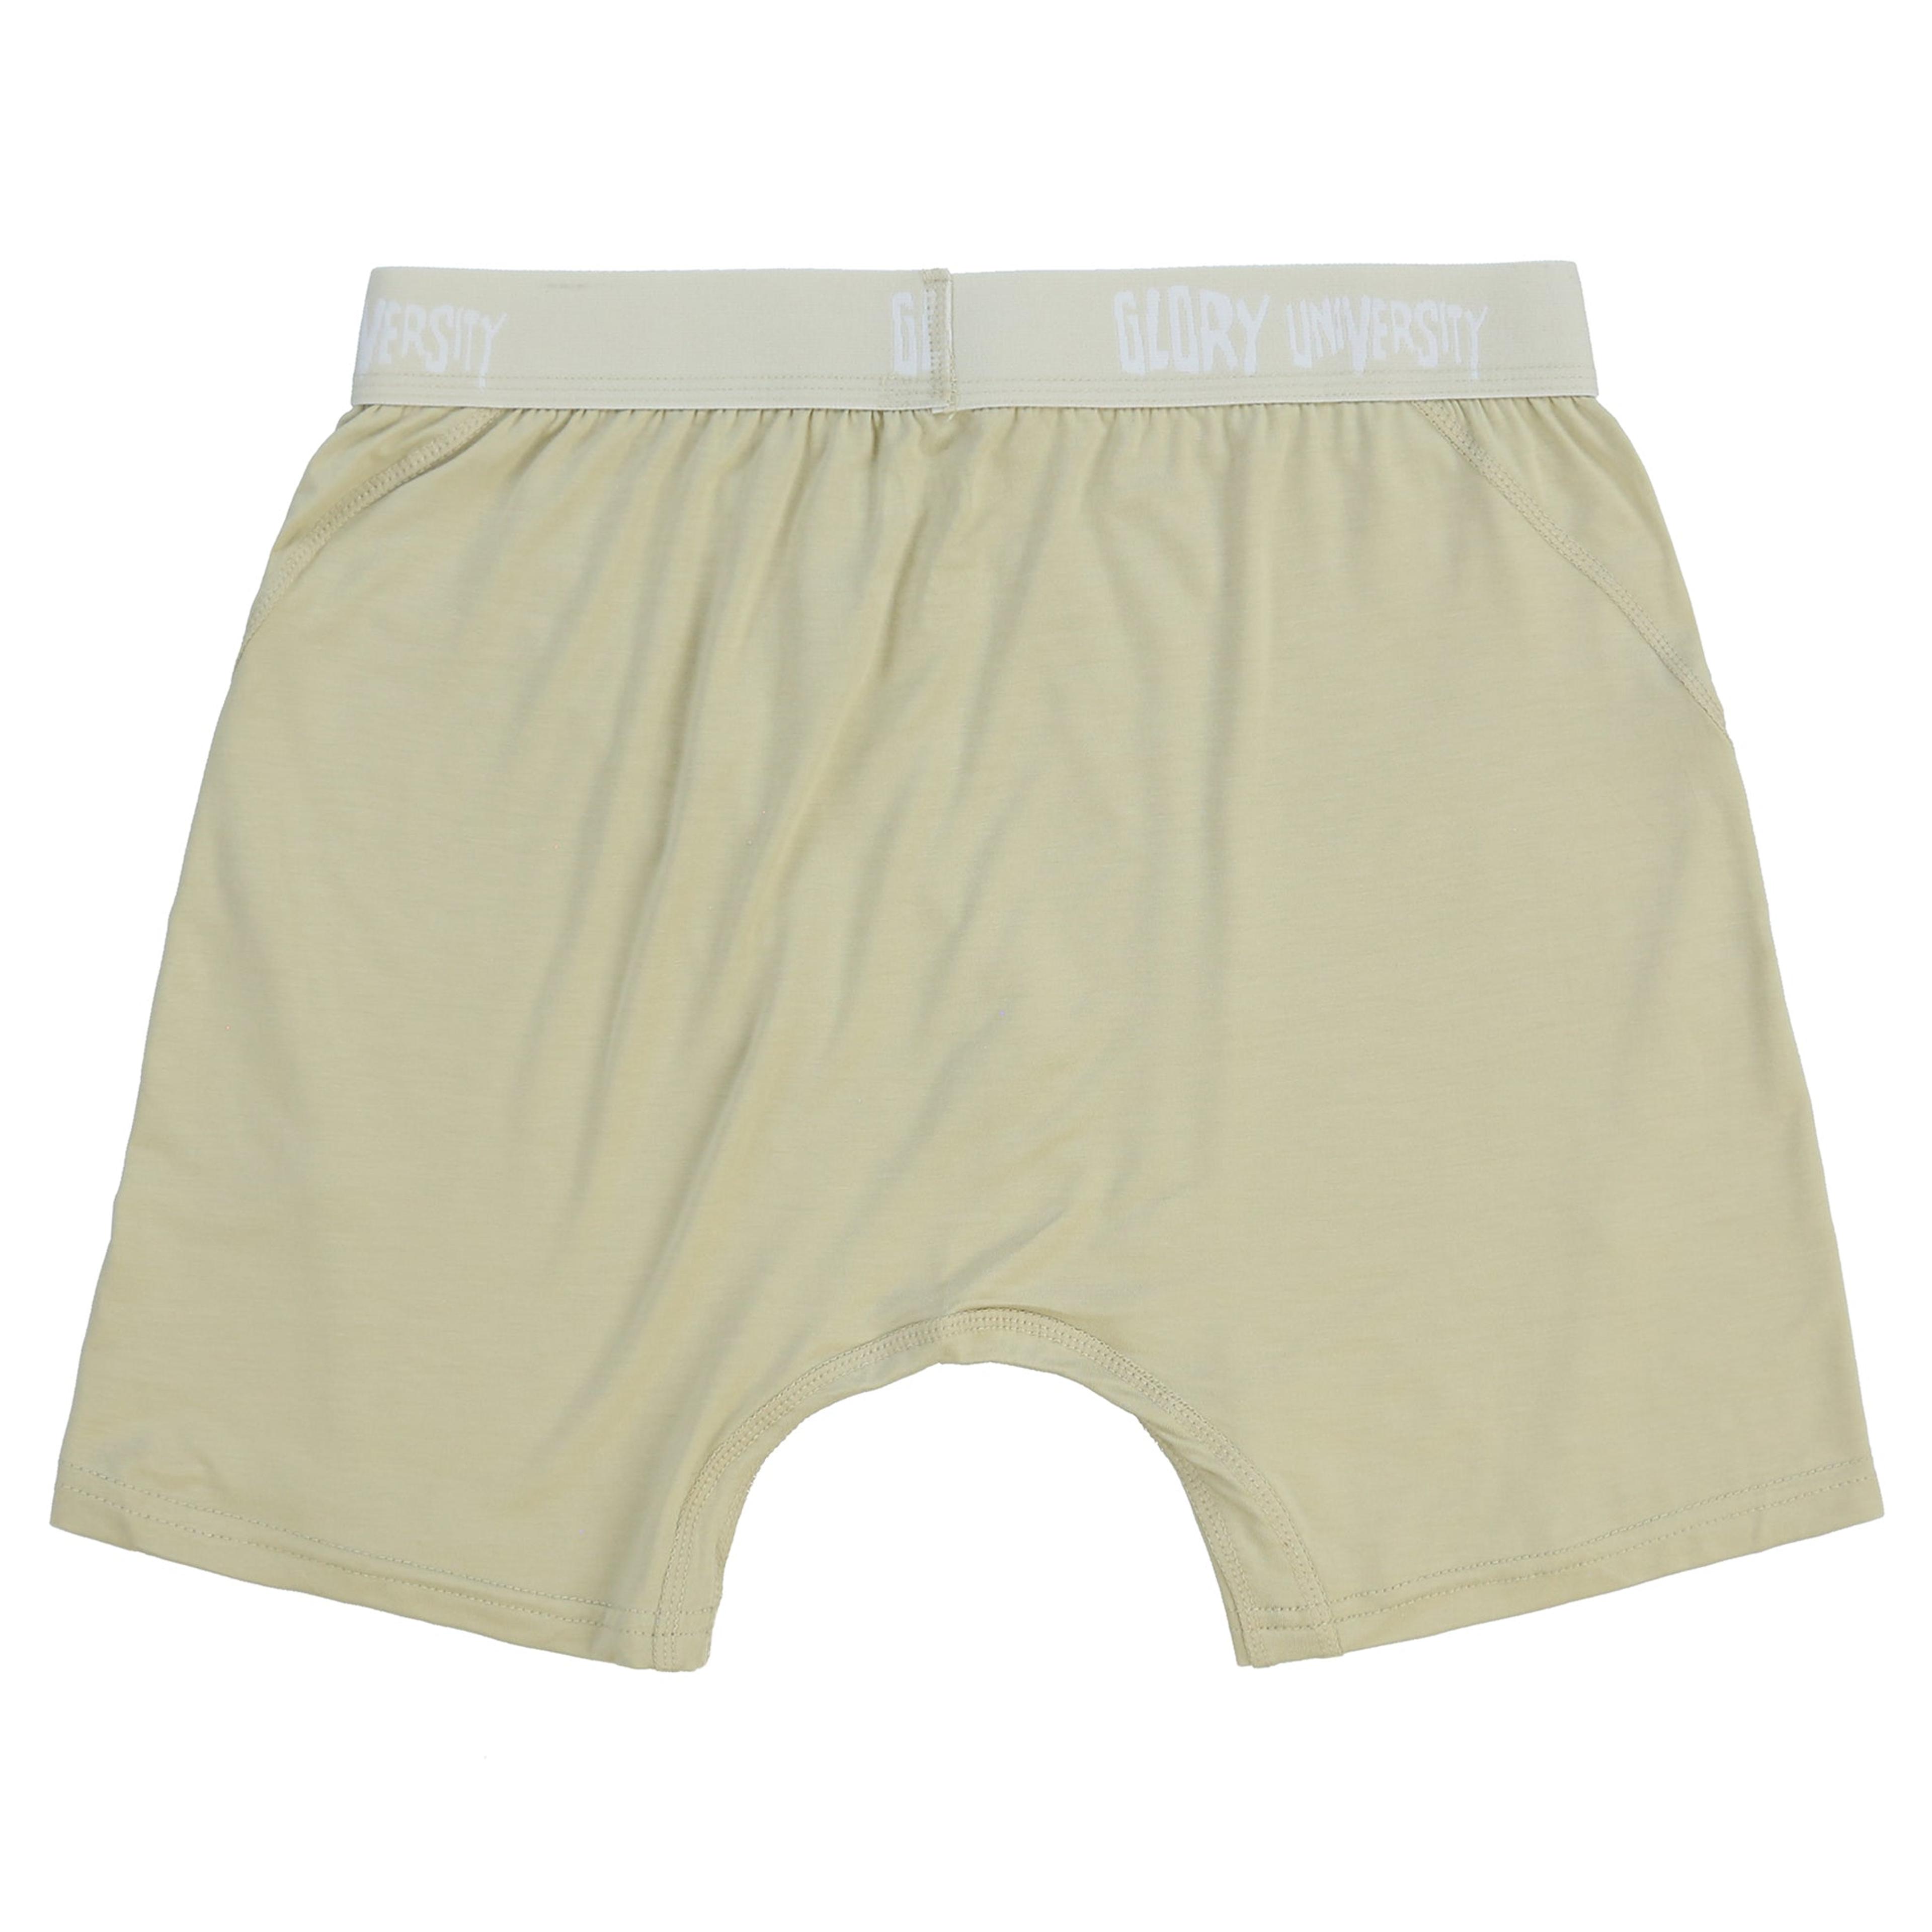 Alternate View 1 of Glo Gang Boxer Brief (Tan)